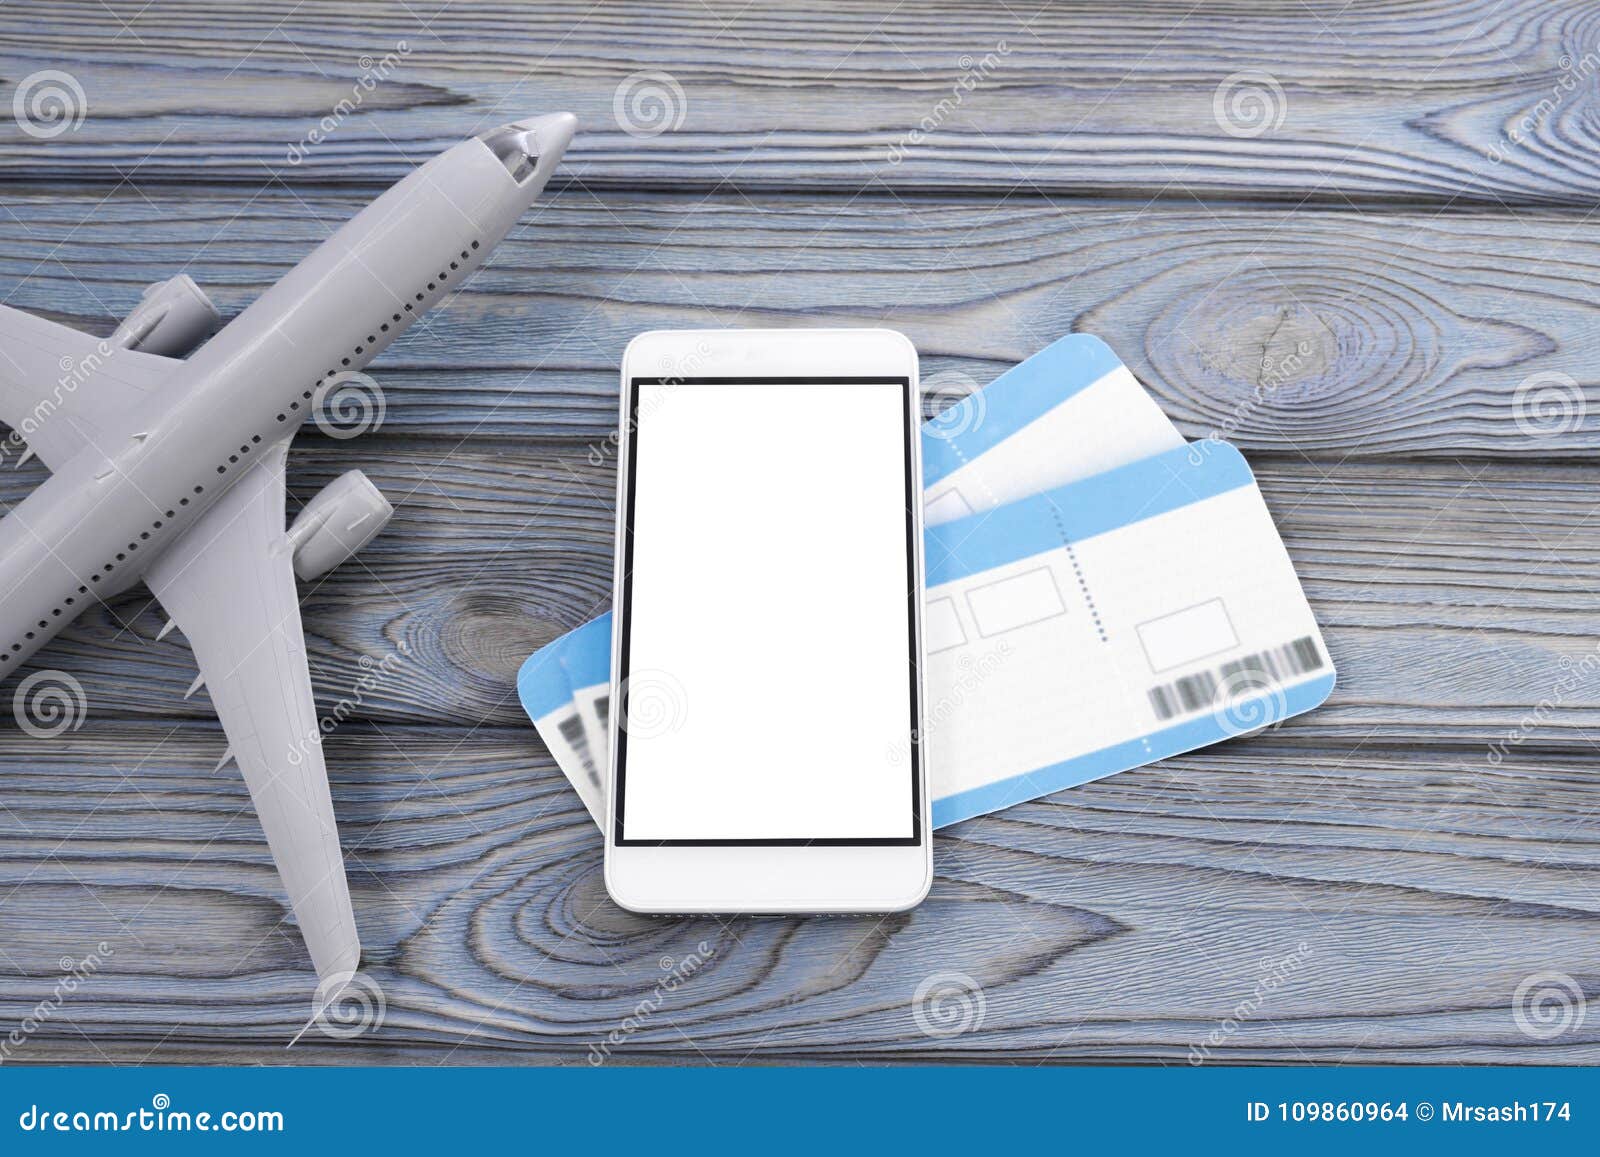 plane, tickets, smartphone with a white screen on a wooden background.